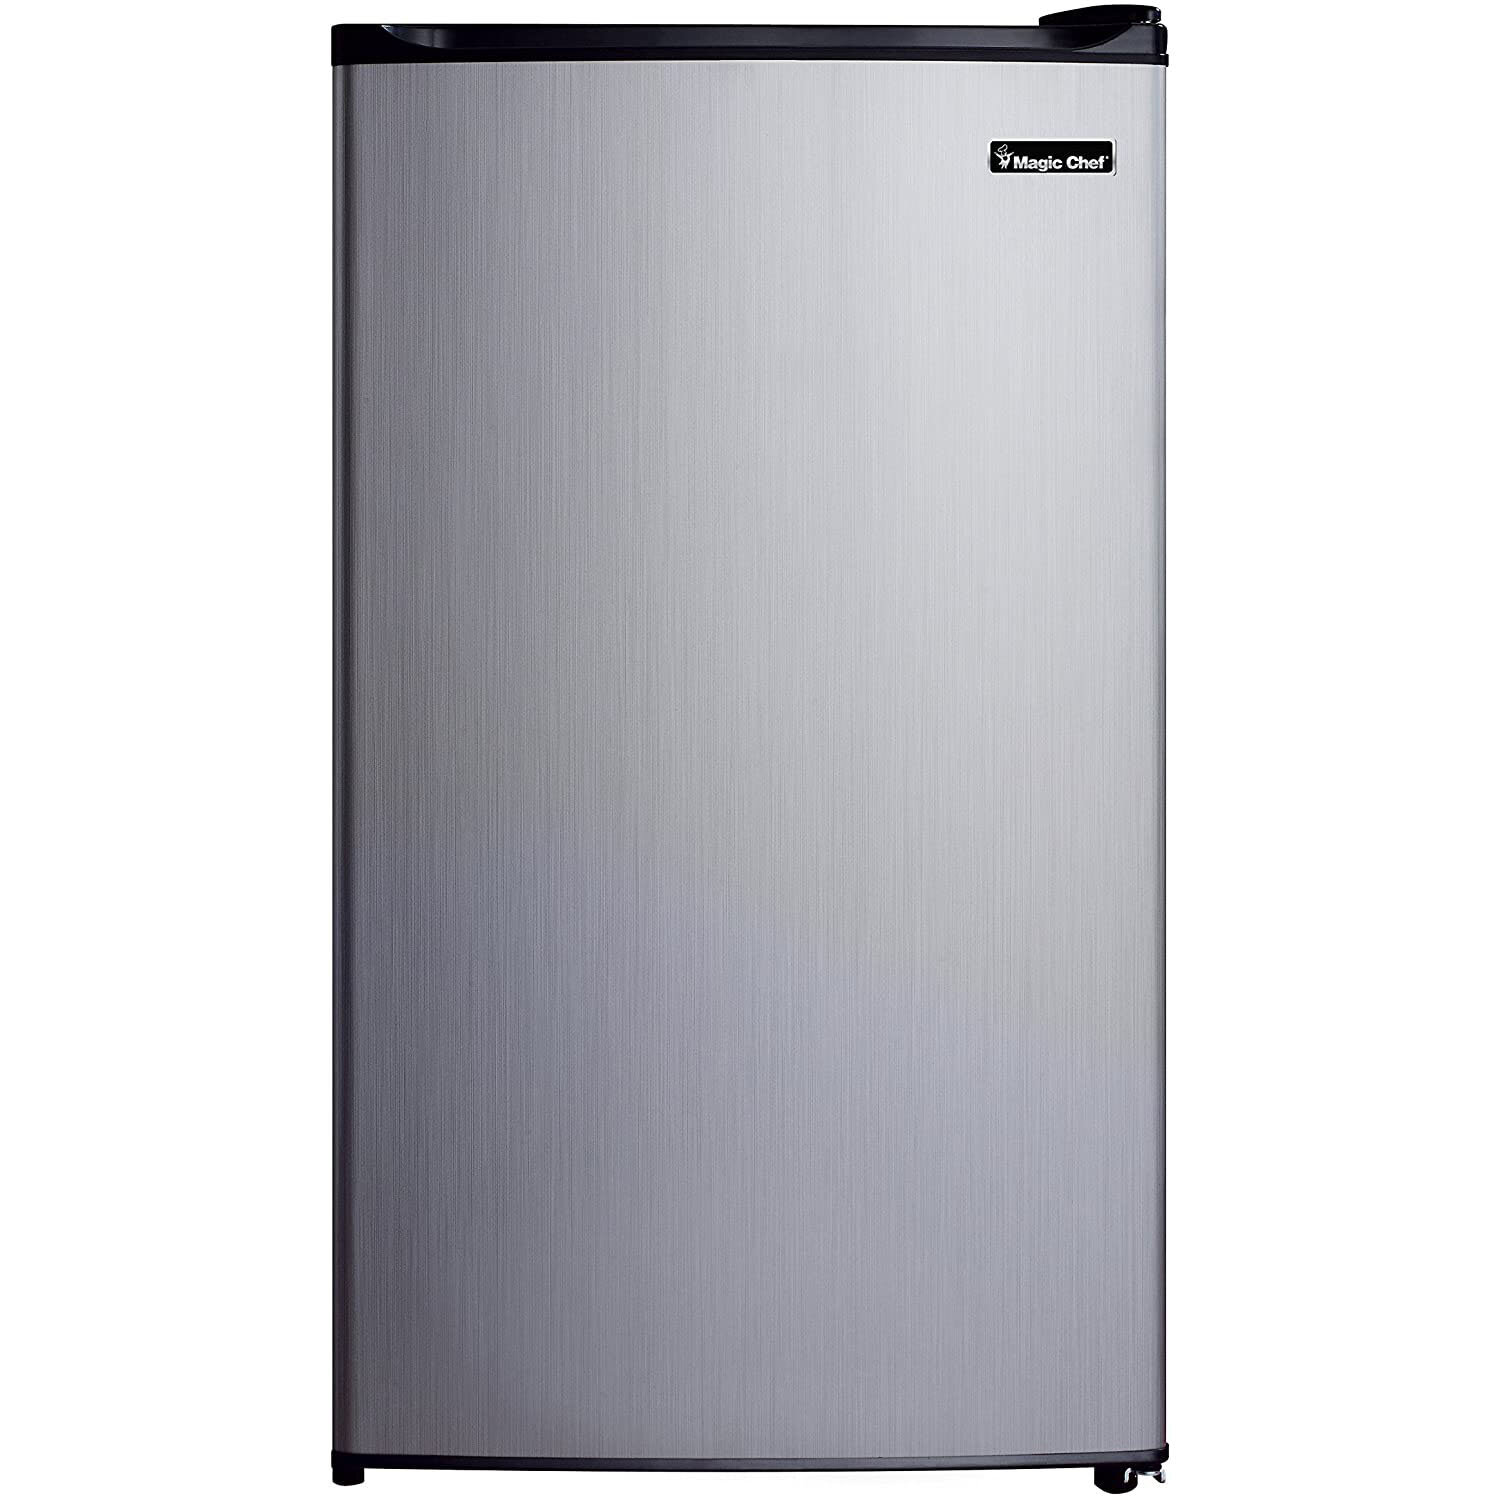 Tall mini refrigerator Magic Chef - appliances - by owner - sale